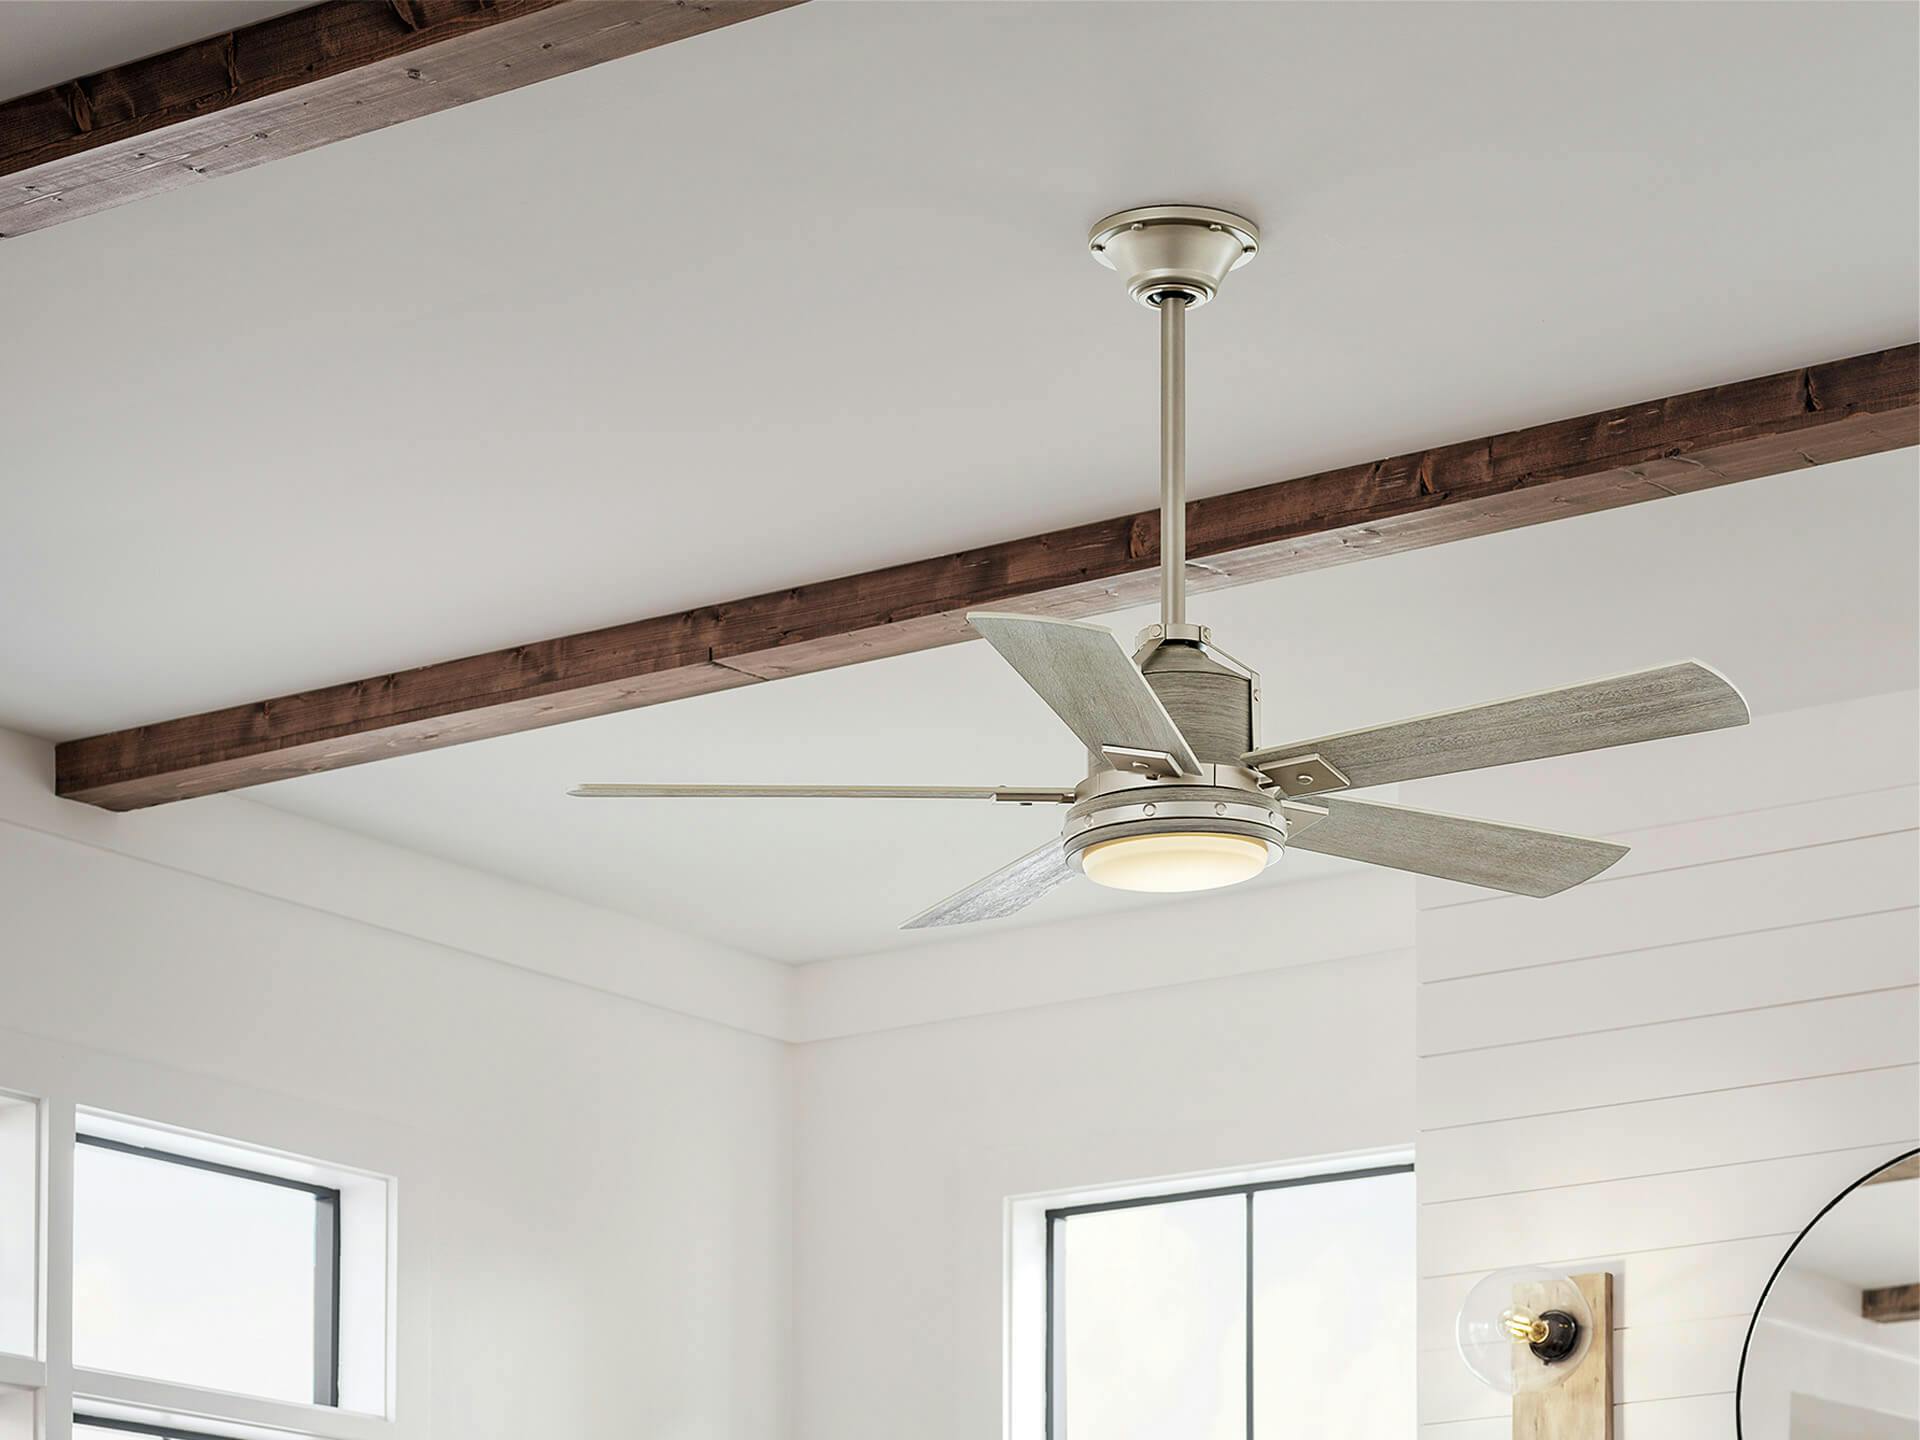 Colerne ceiling fan featured in a living room